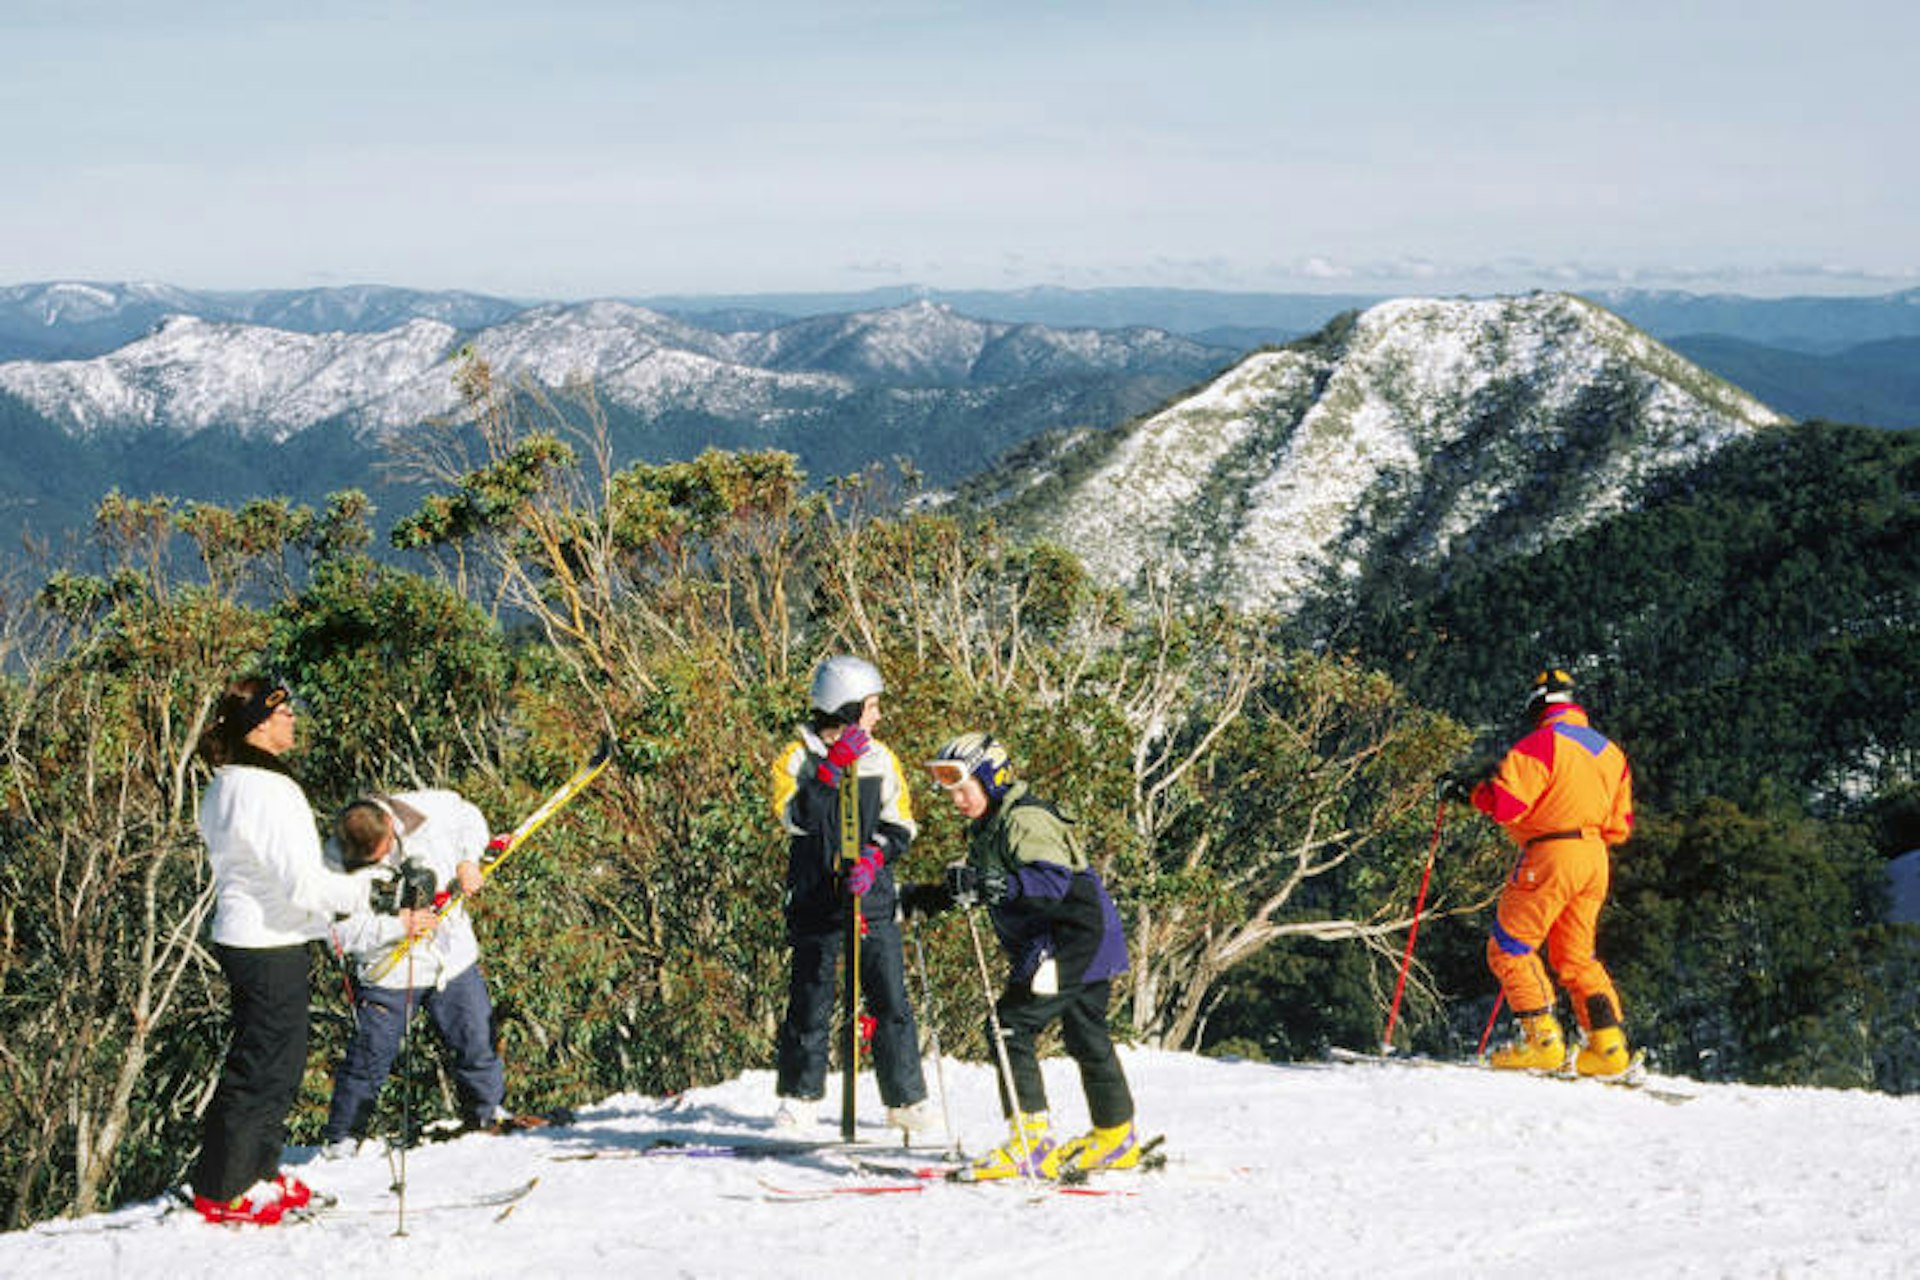 Skiing on Mt Buller in Victoria’s High Country. Image by Richard Nebesky / Getty Images